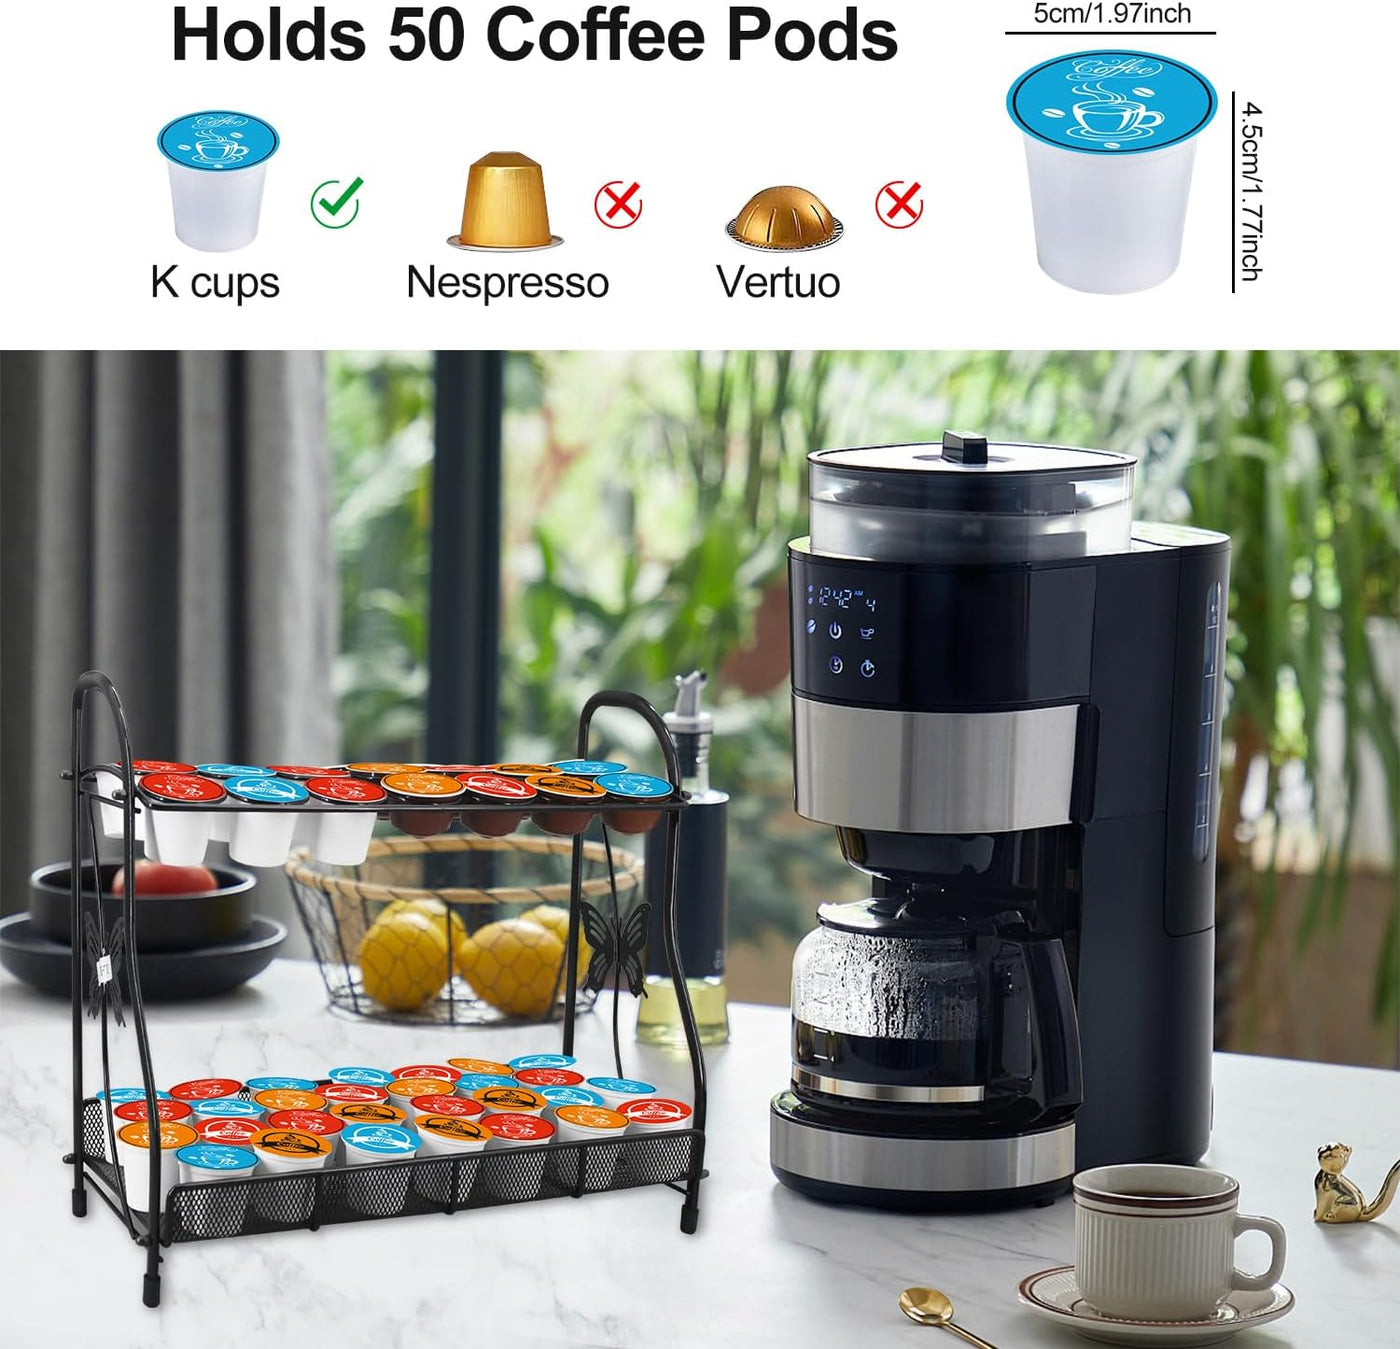 Large Capacity Coffee Pod Holder Cup Storage Organizer and Coffee